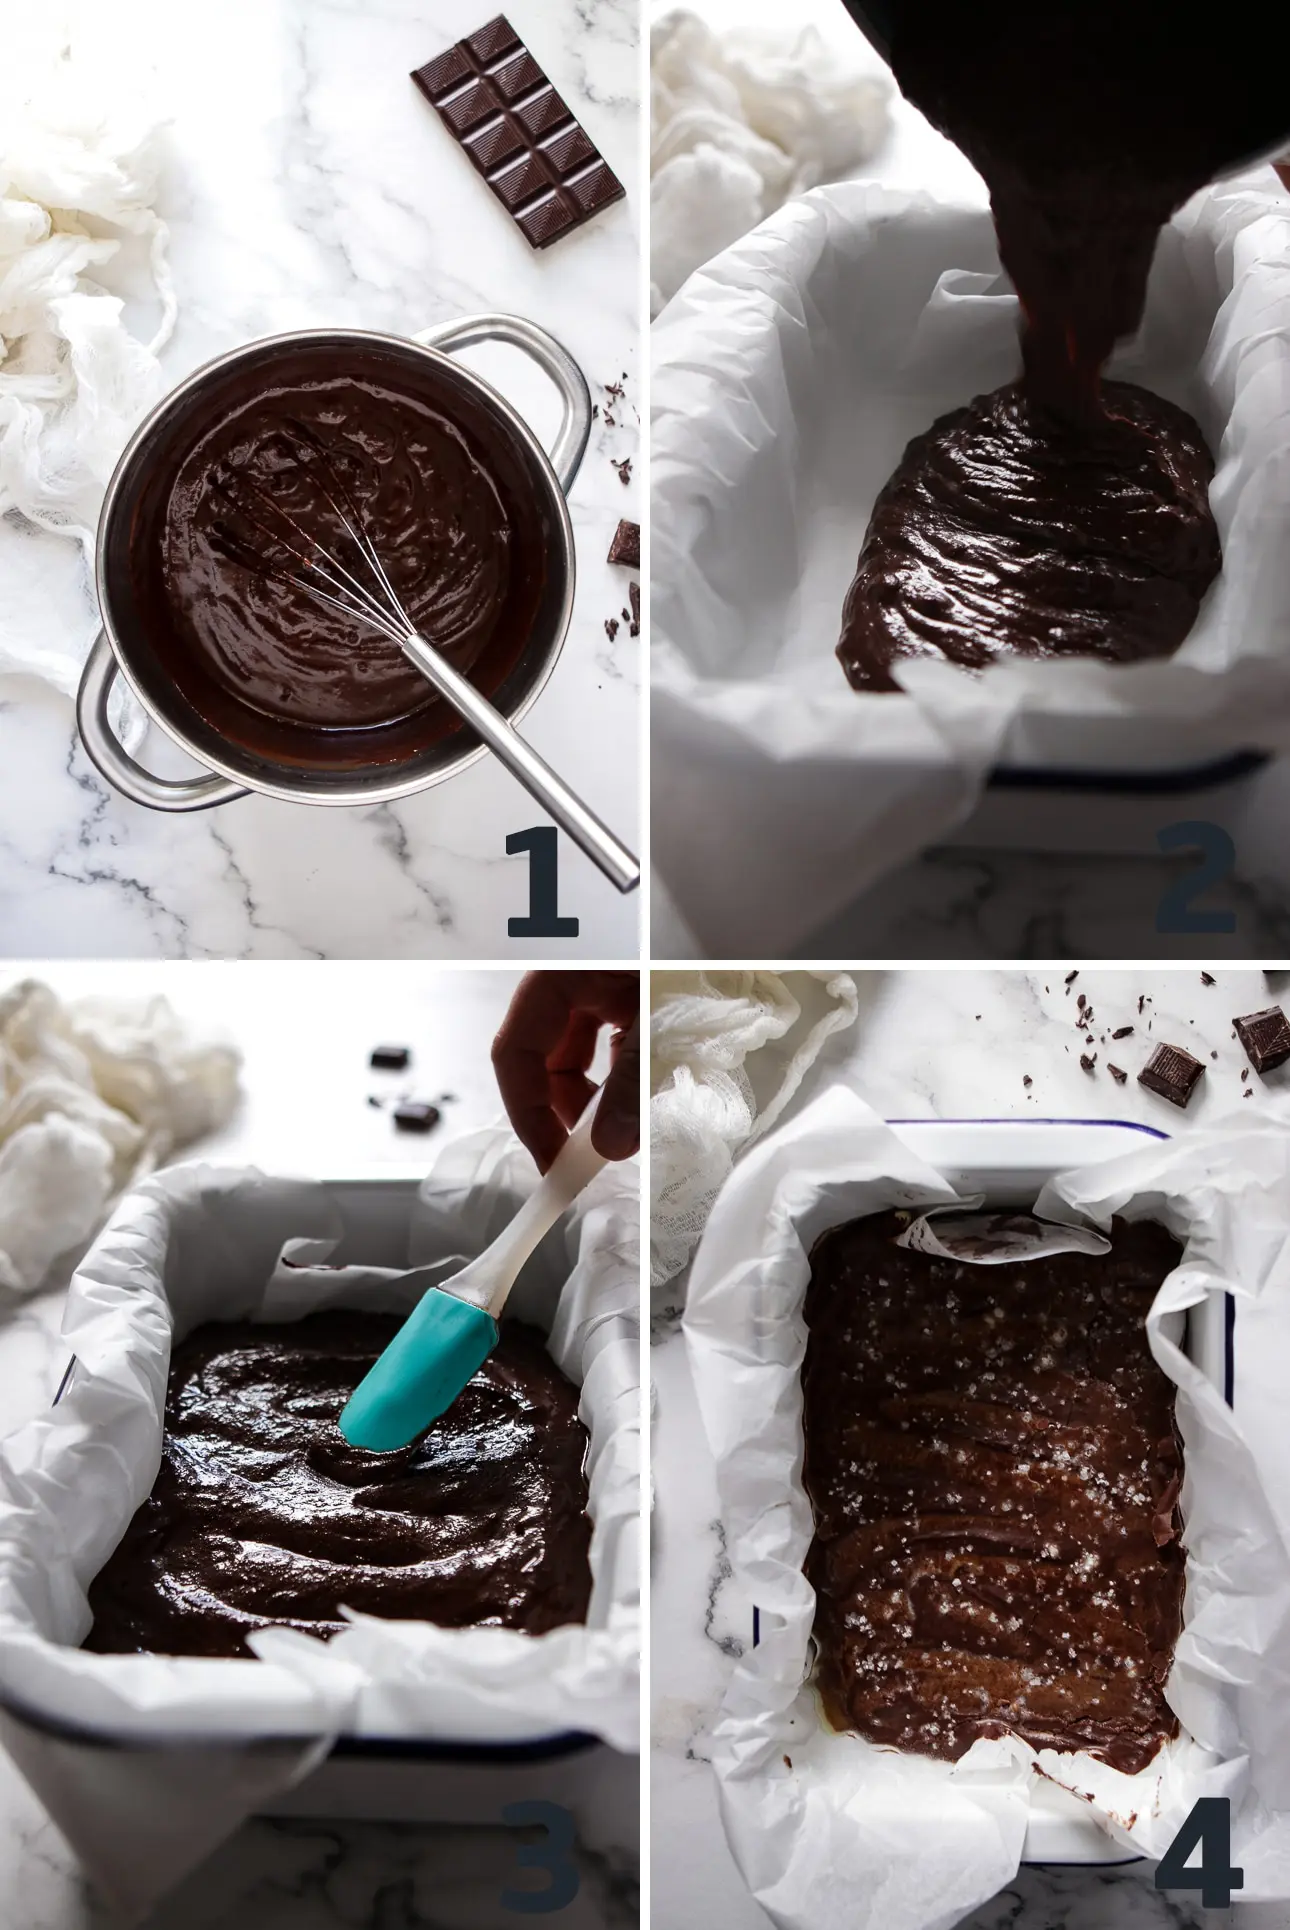 Instructions for Making the Best Vegan Chocolate Fudge